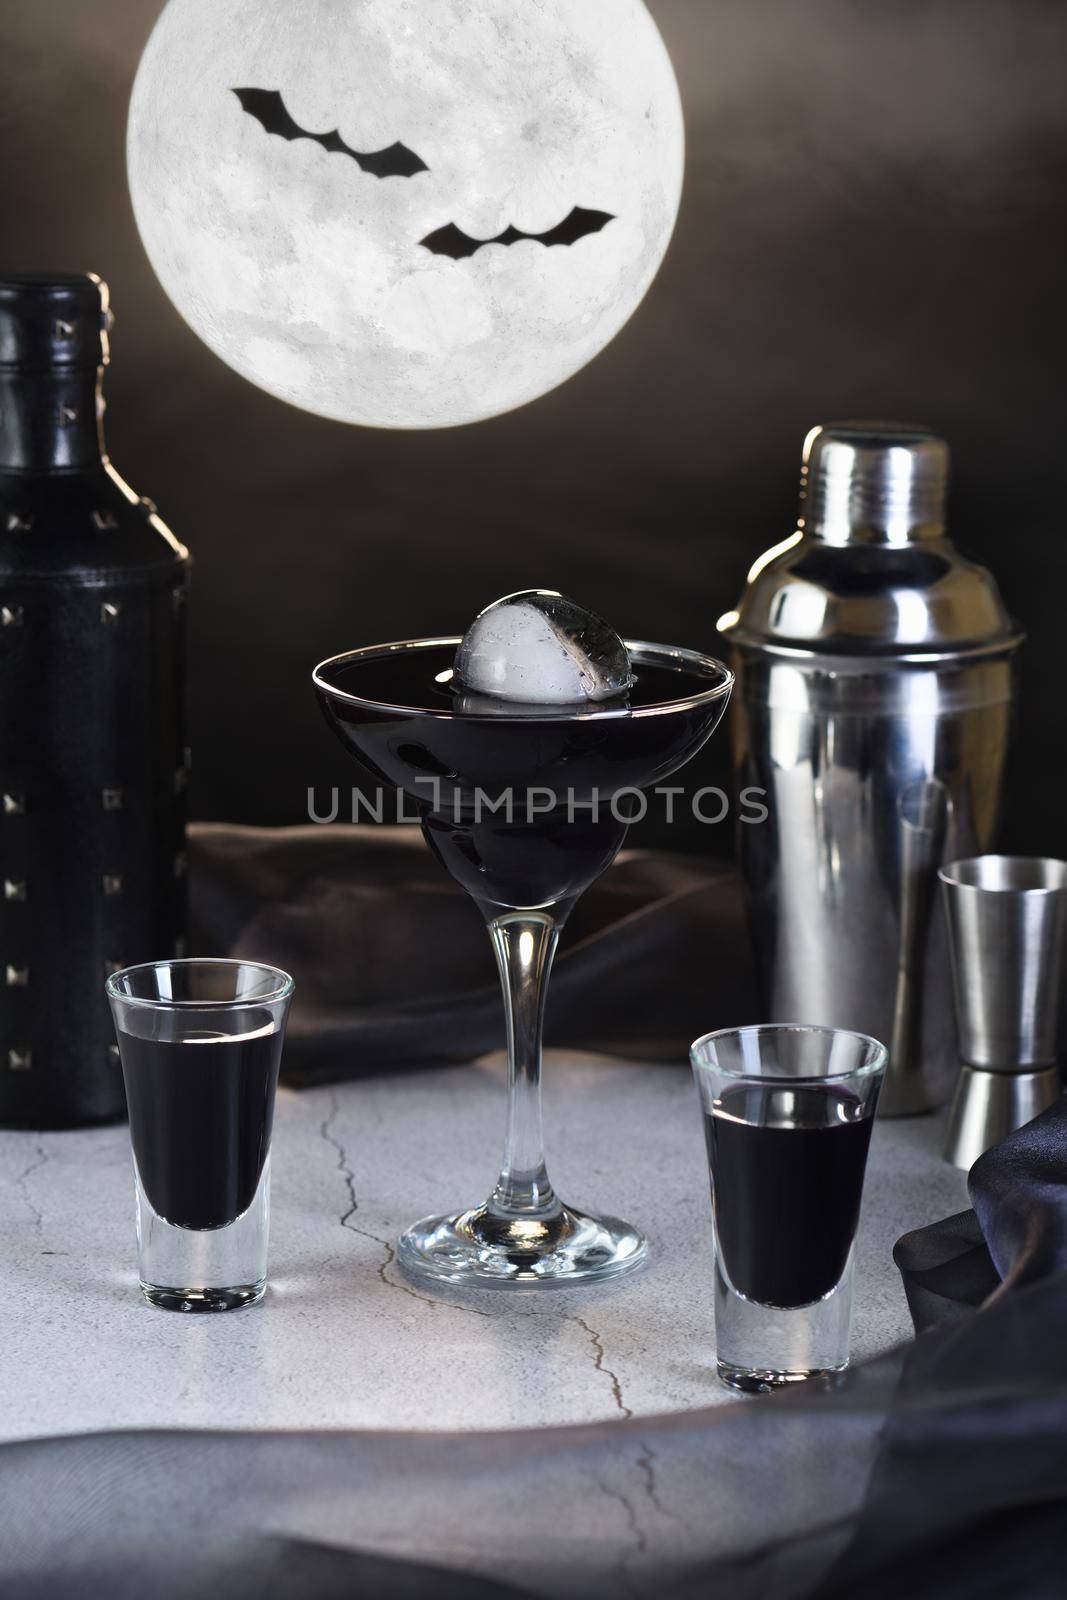 Blueberry Martini is a Full Moon Tini in a glass. Halloween cocktail idea